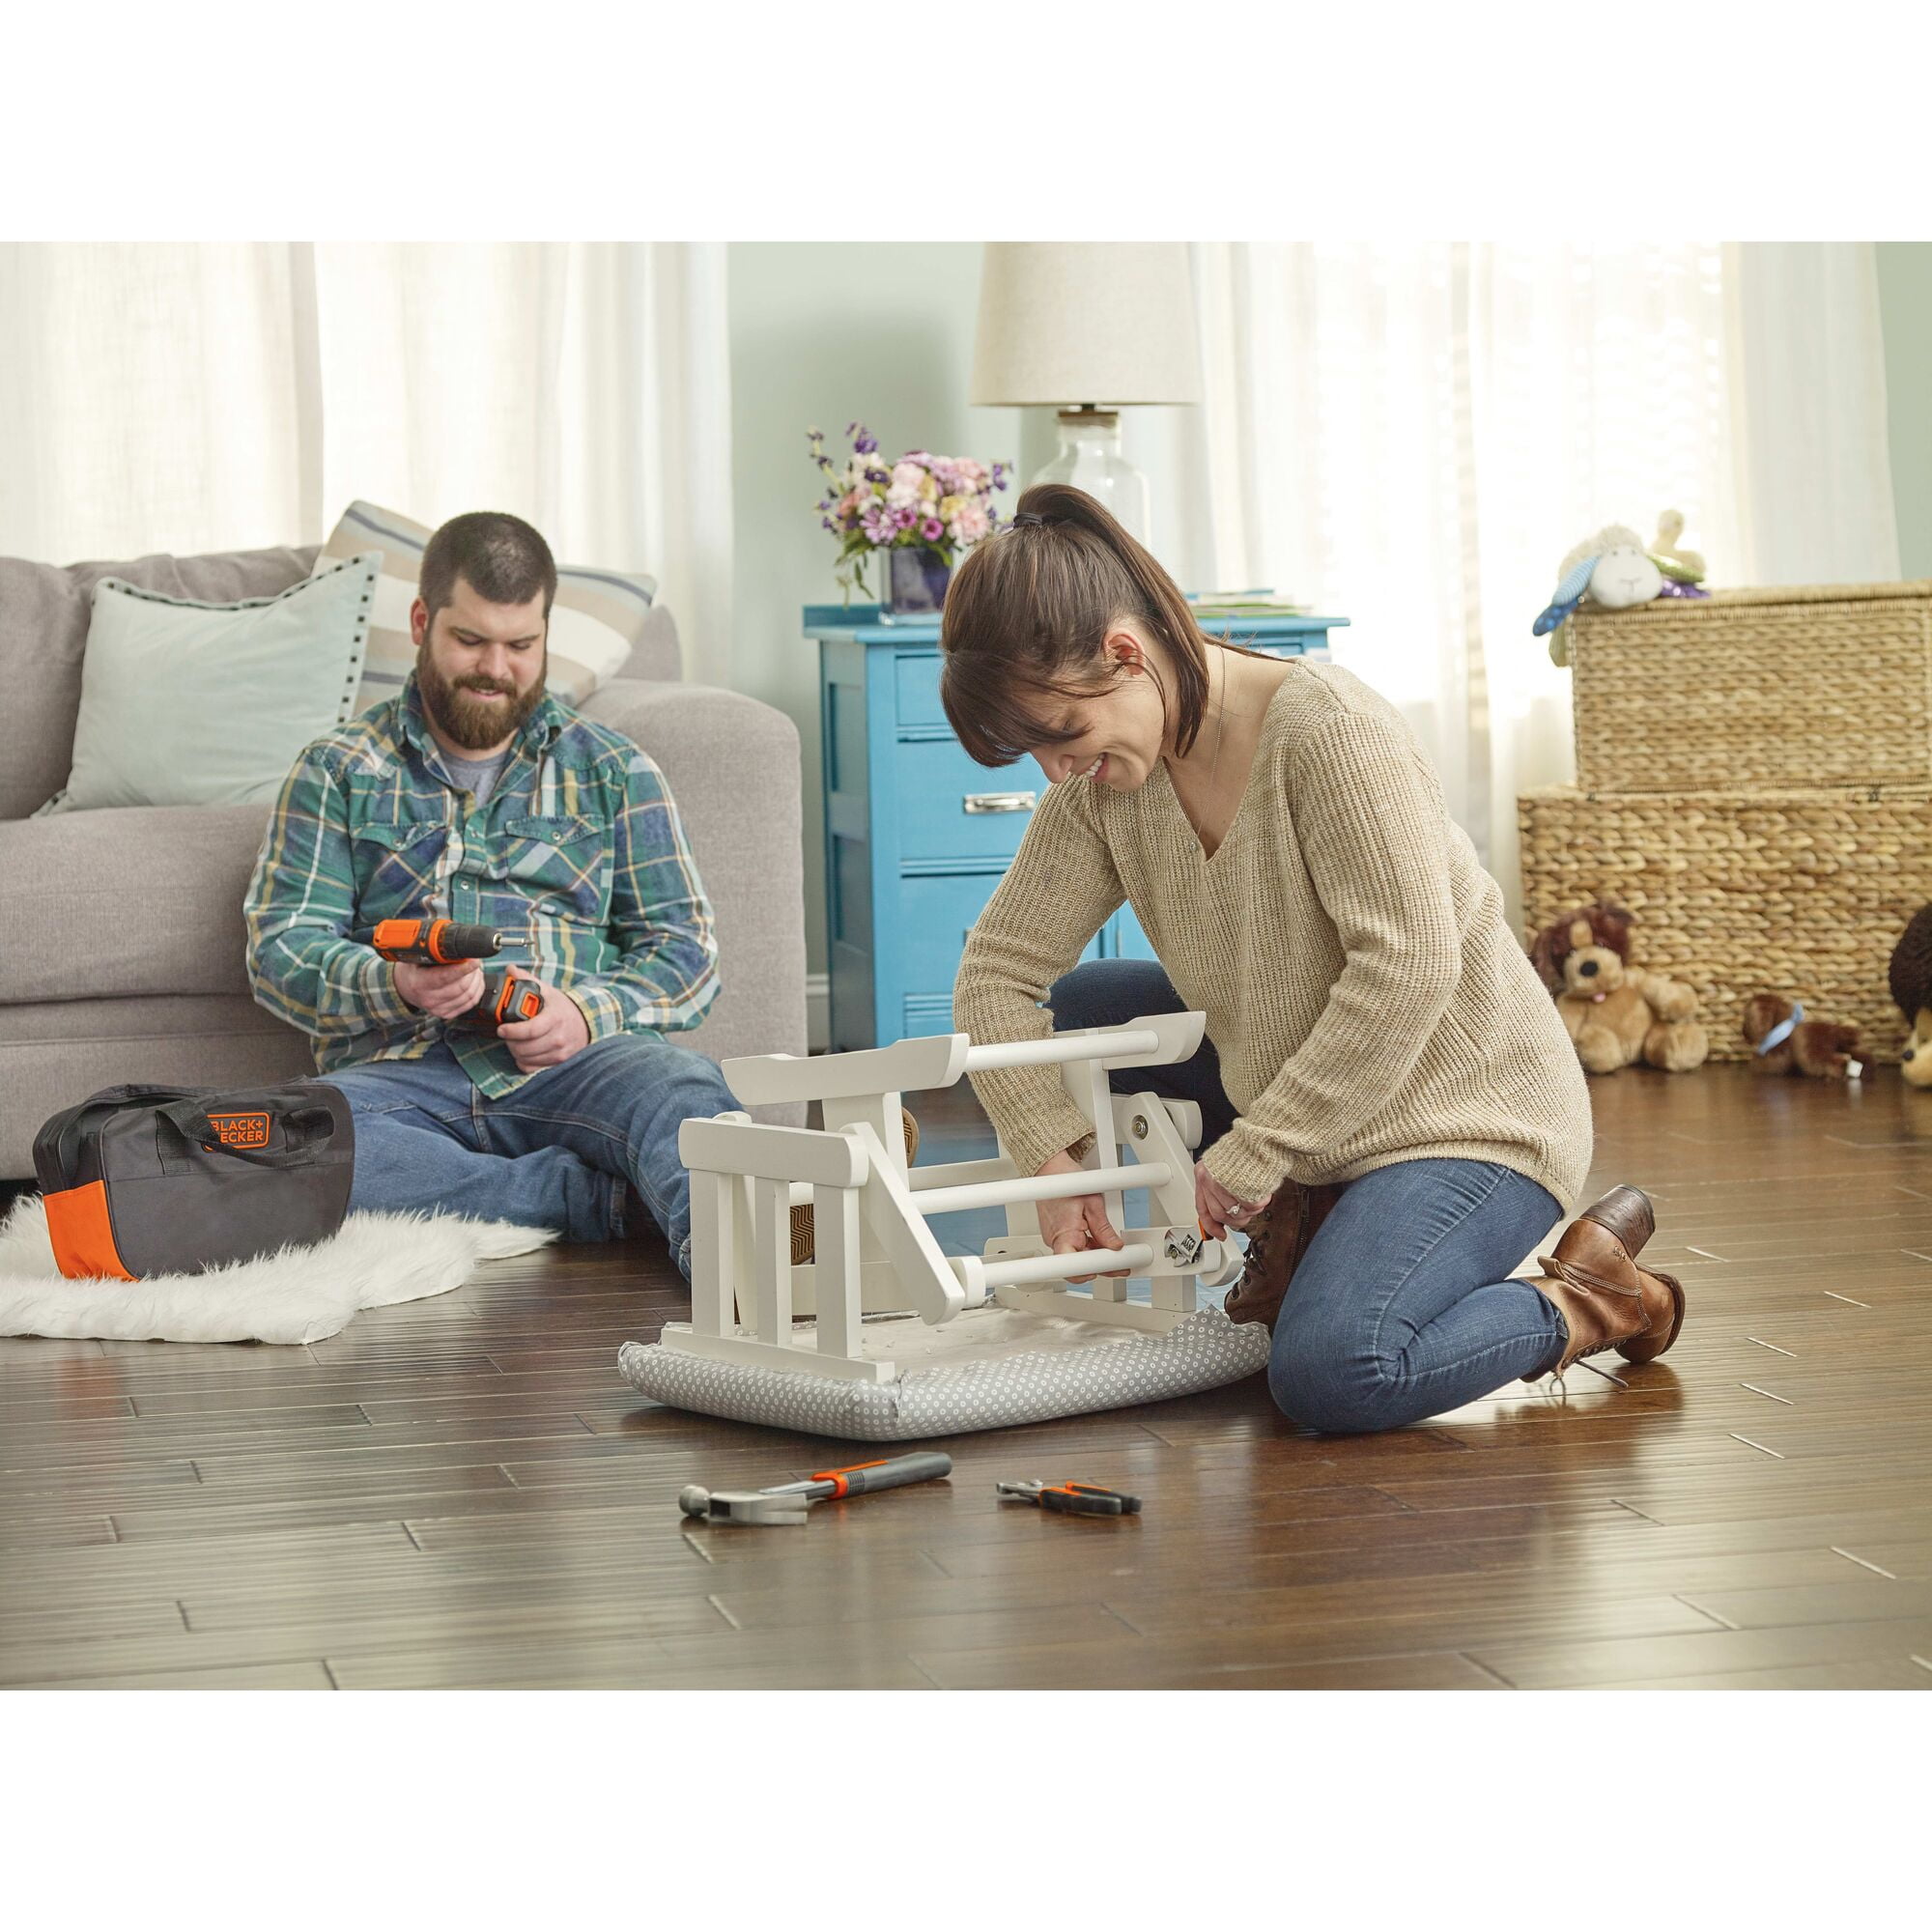 $49 (58% off) snags you an excellent Black & Decker 20V Lithium Drill/Driver  Project Kit